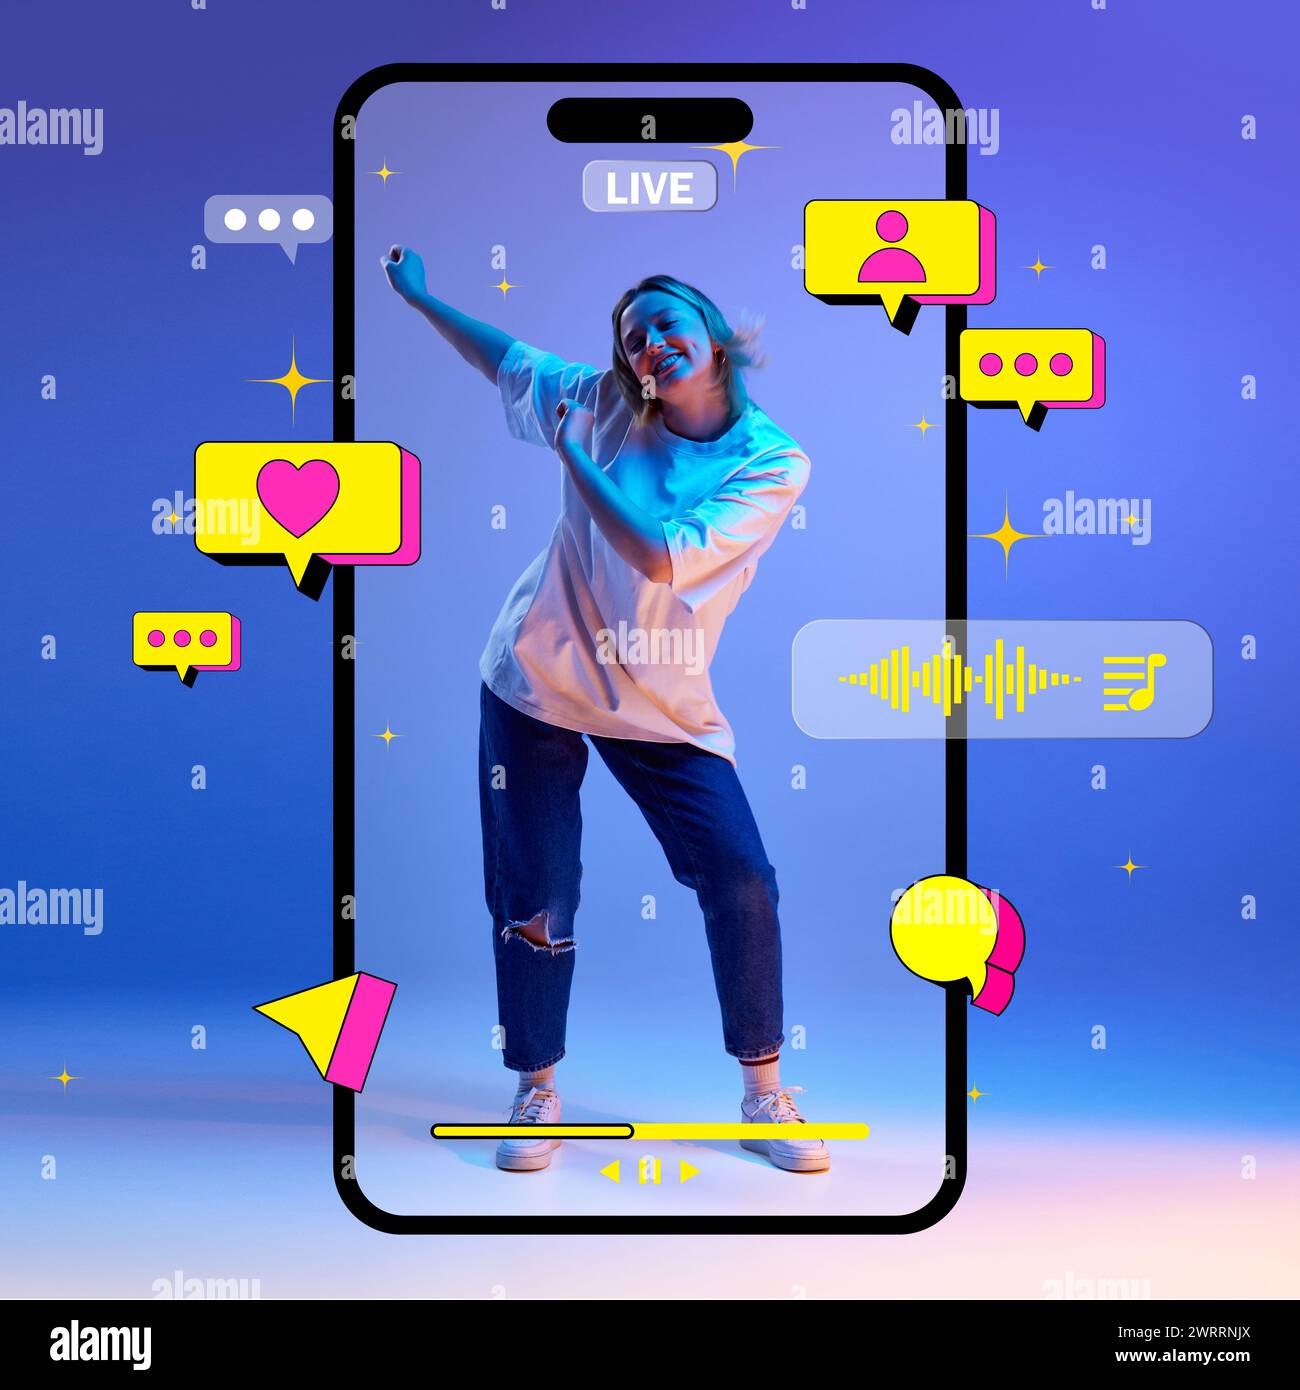 Social media live streaming. Happy young gird dancing inside giant mobile phone screen with different media icons of likes, followers and messages Stock Photo